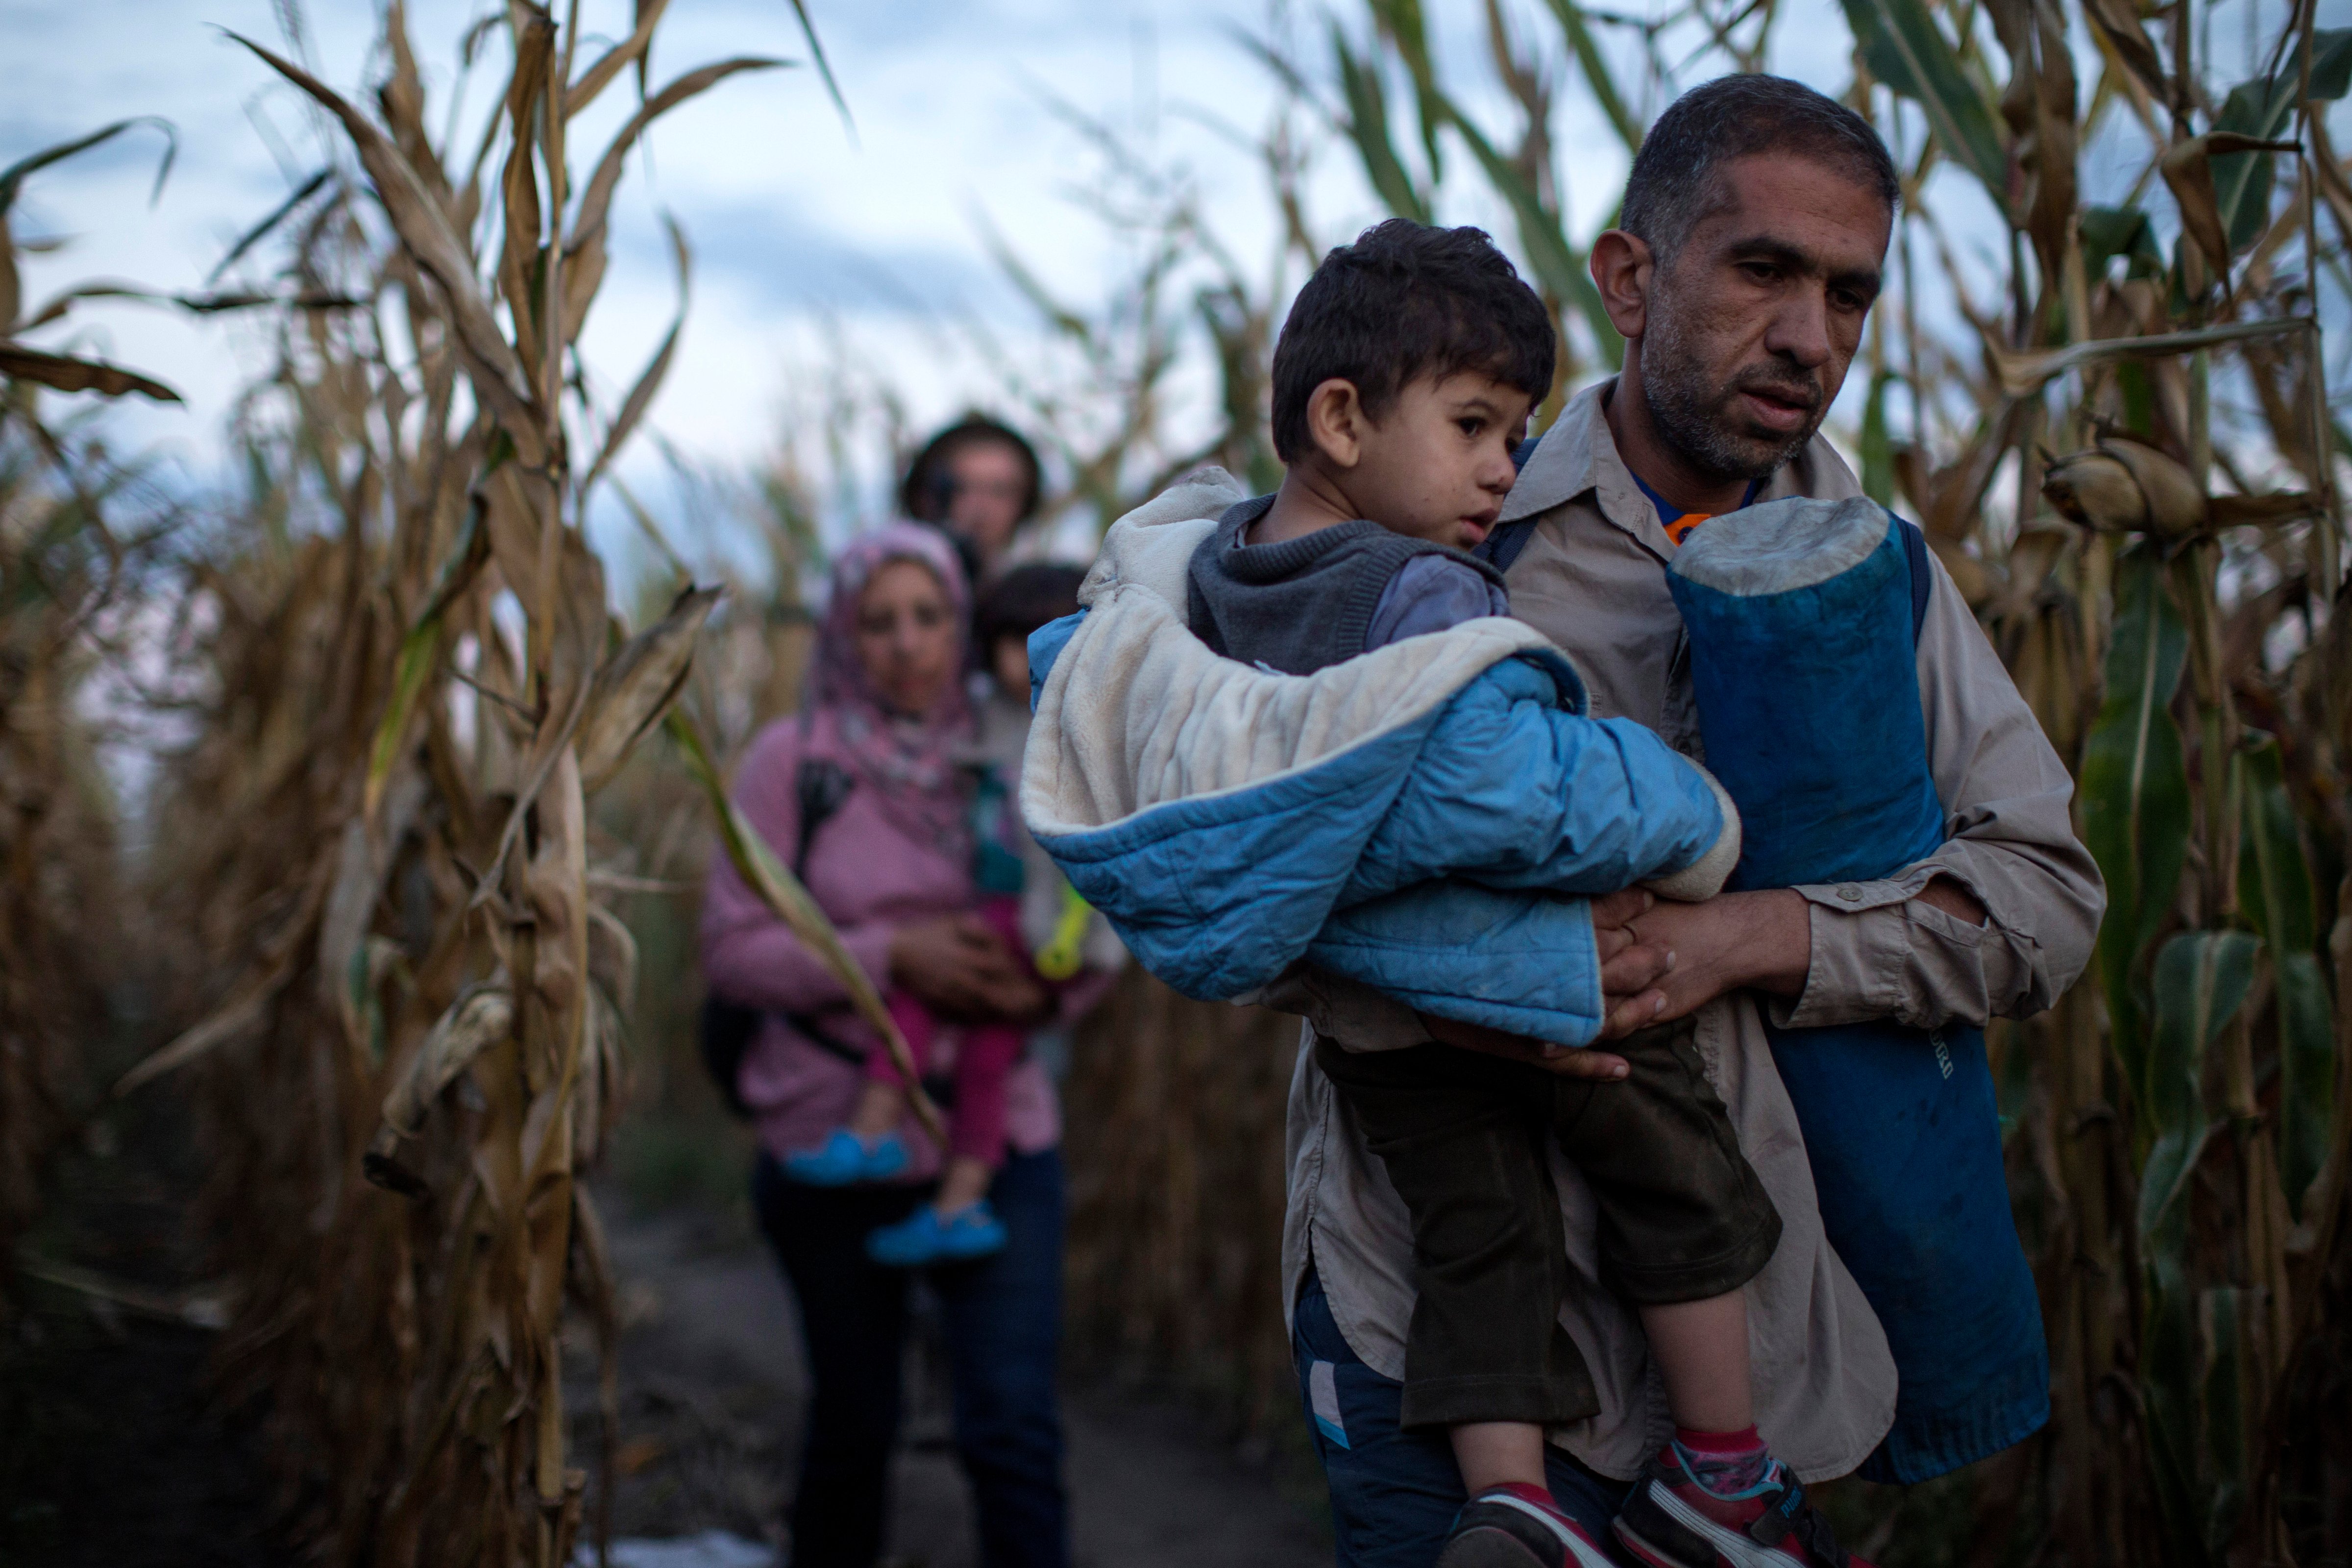 Refugees are smuggled through fields and forests in an attempt to evade the Hungarian police close to the Serbian border on September 8, 2015 in Roszke, Hungary. (Dan Kitwood— Getty Images)